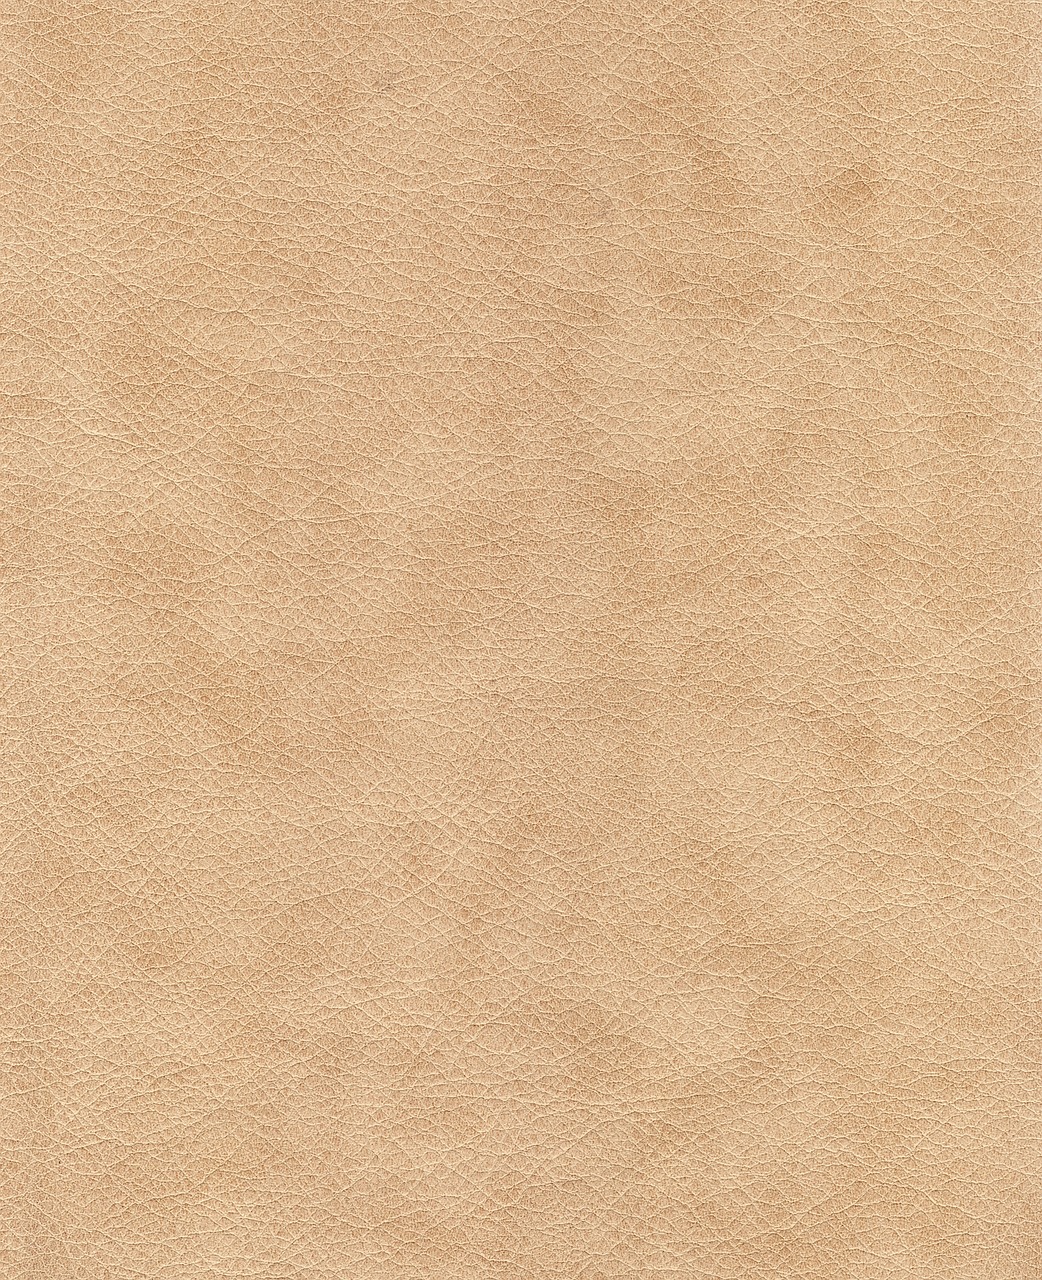 a close up of a tan leather surface, a pastel, by Carlo Randanini, shutterstock, tonalism, paper texture. 1968, wyoming, high detail product photo, ultrafine detail ”